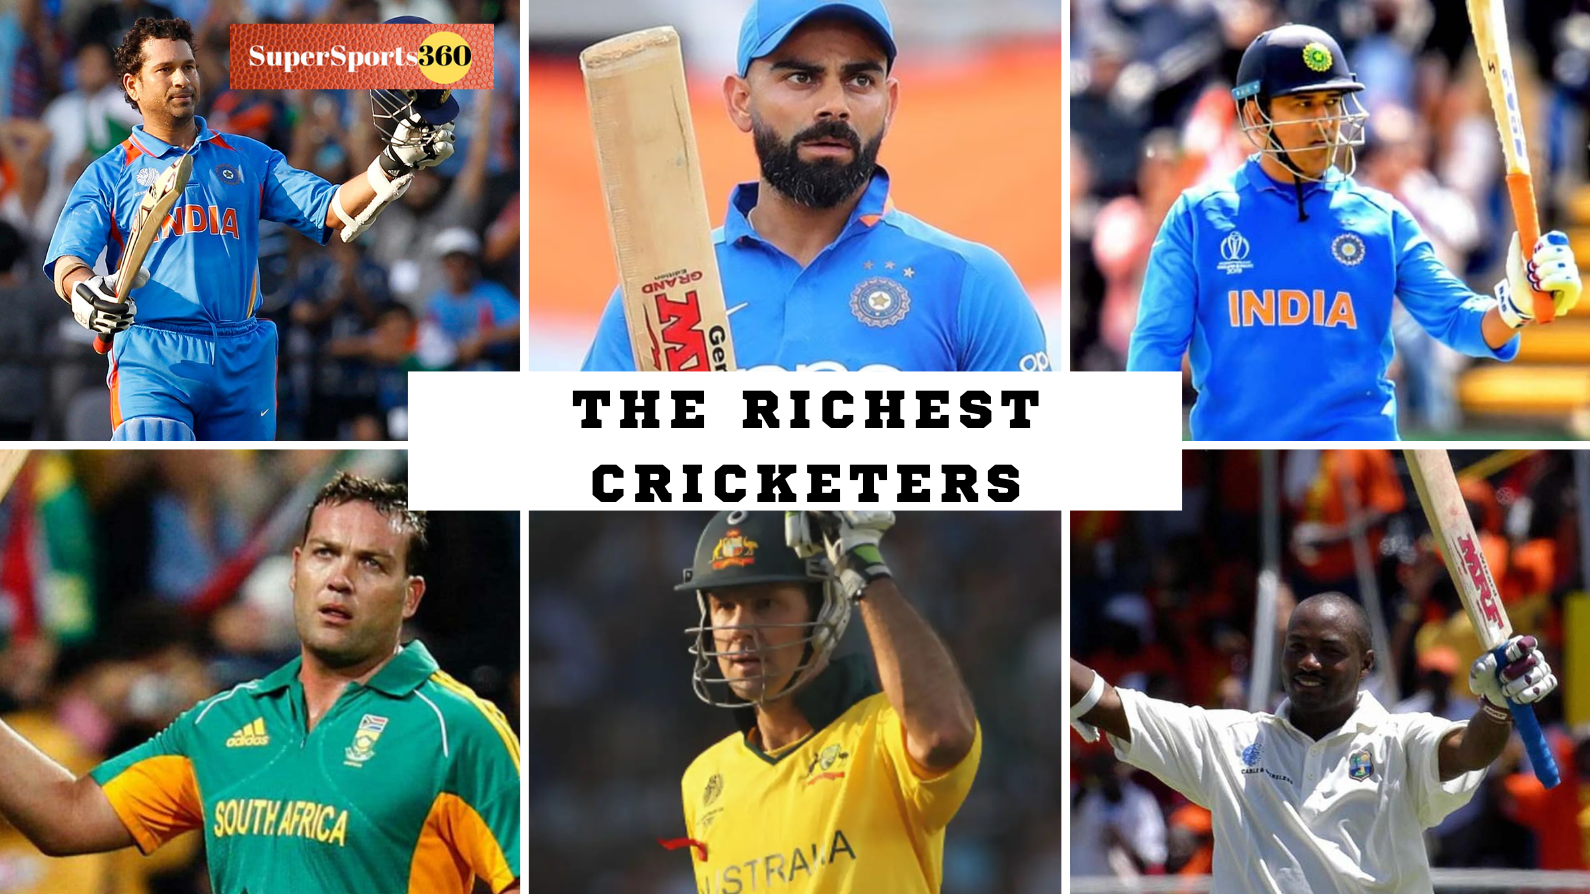 How Cricketers Make Their Millions | The Richest Cricketers